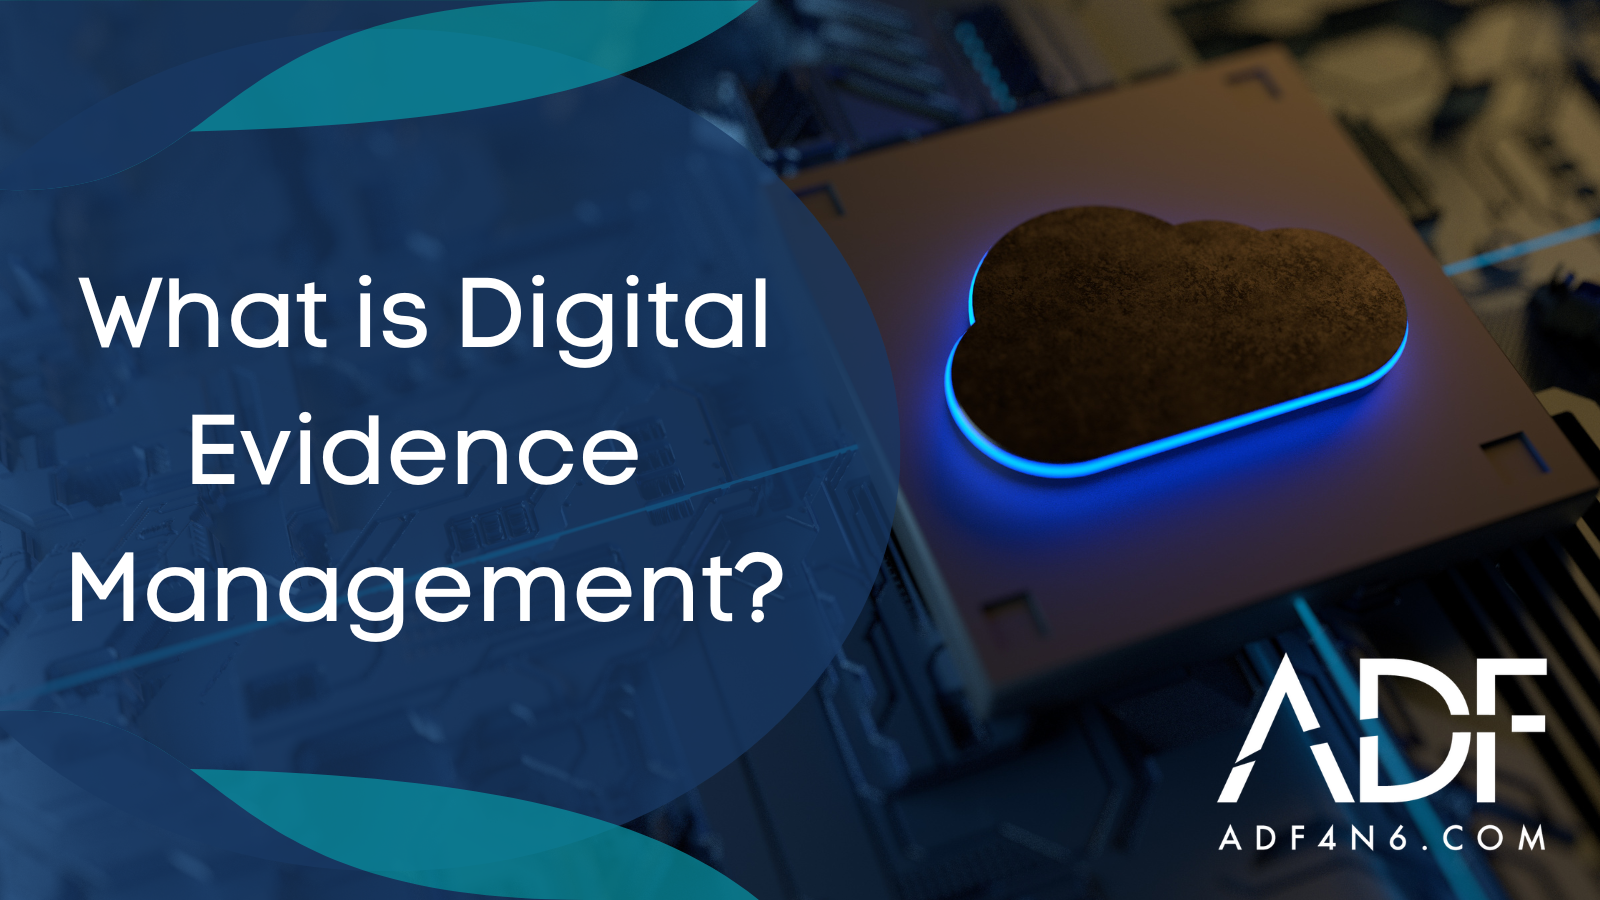 What is Digital Evidence Management?